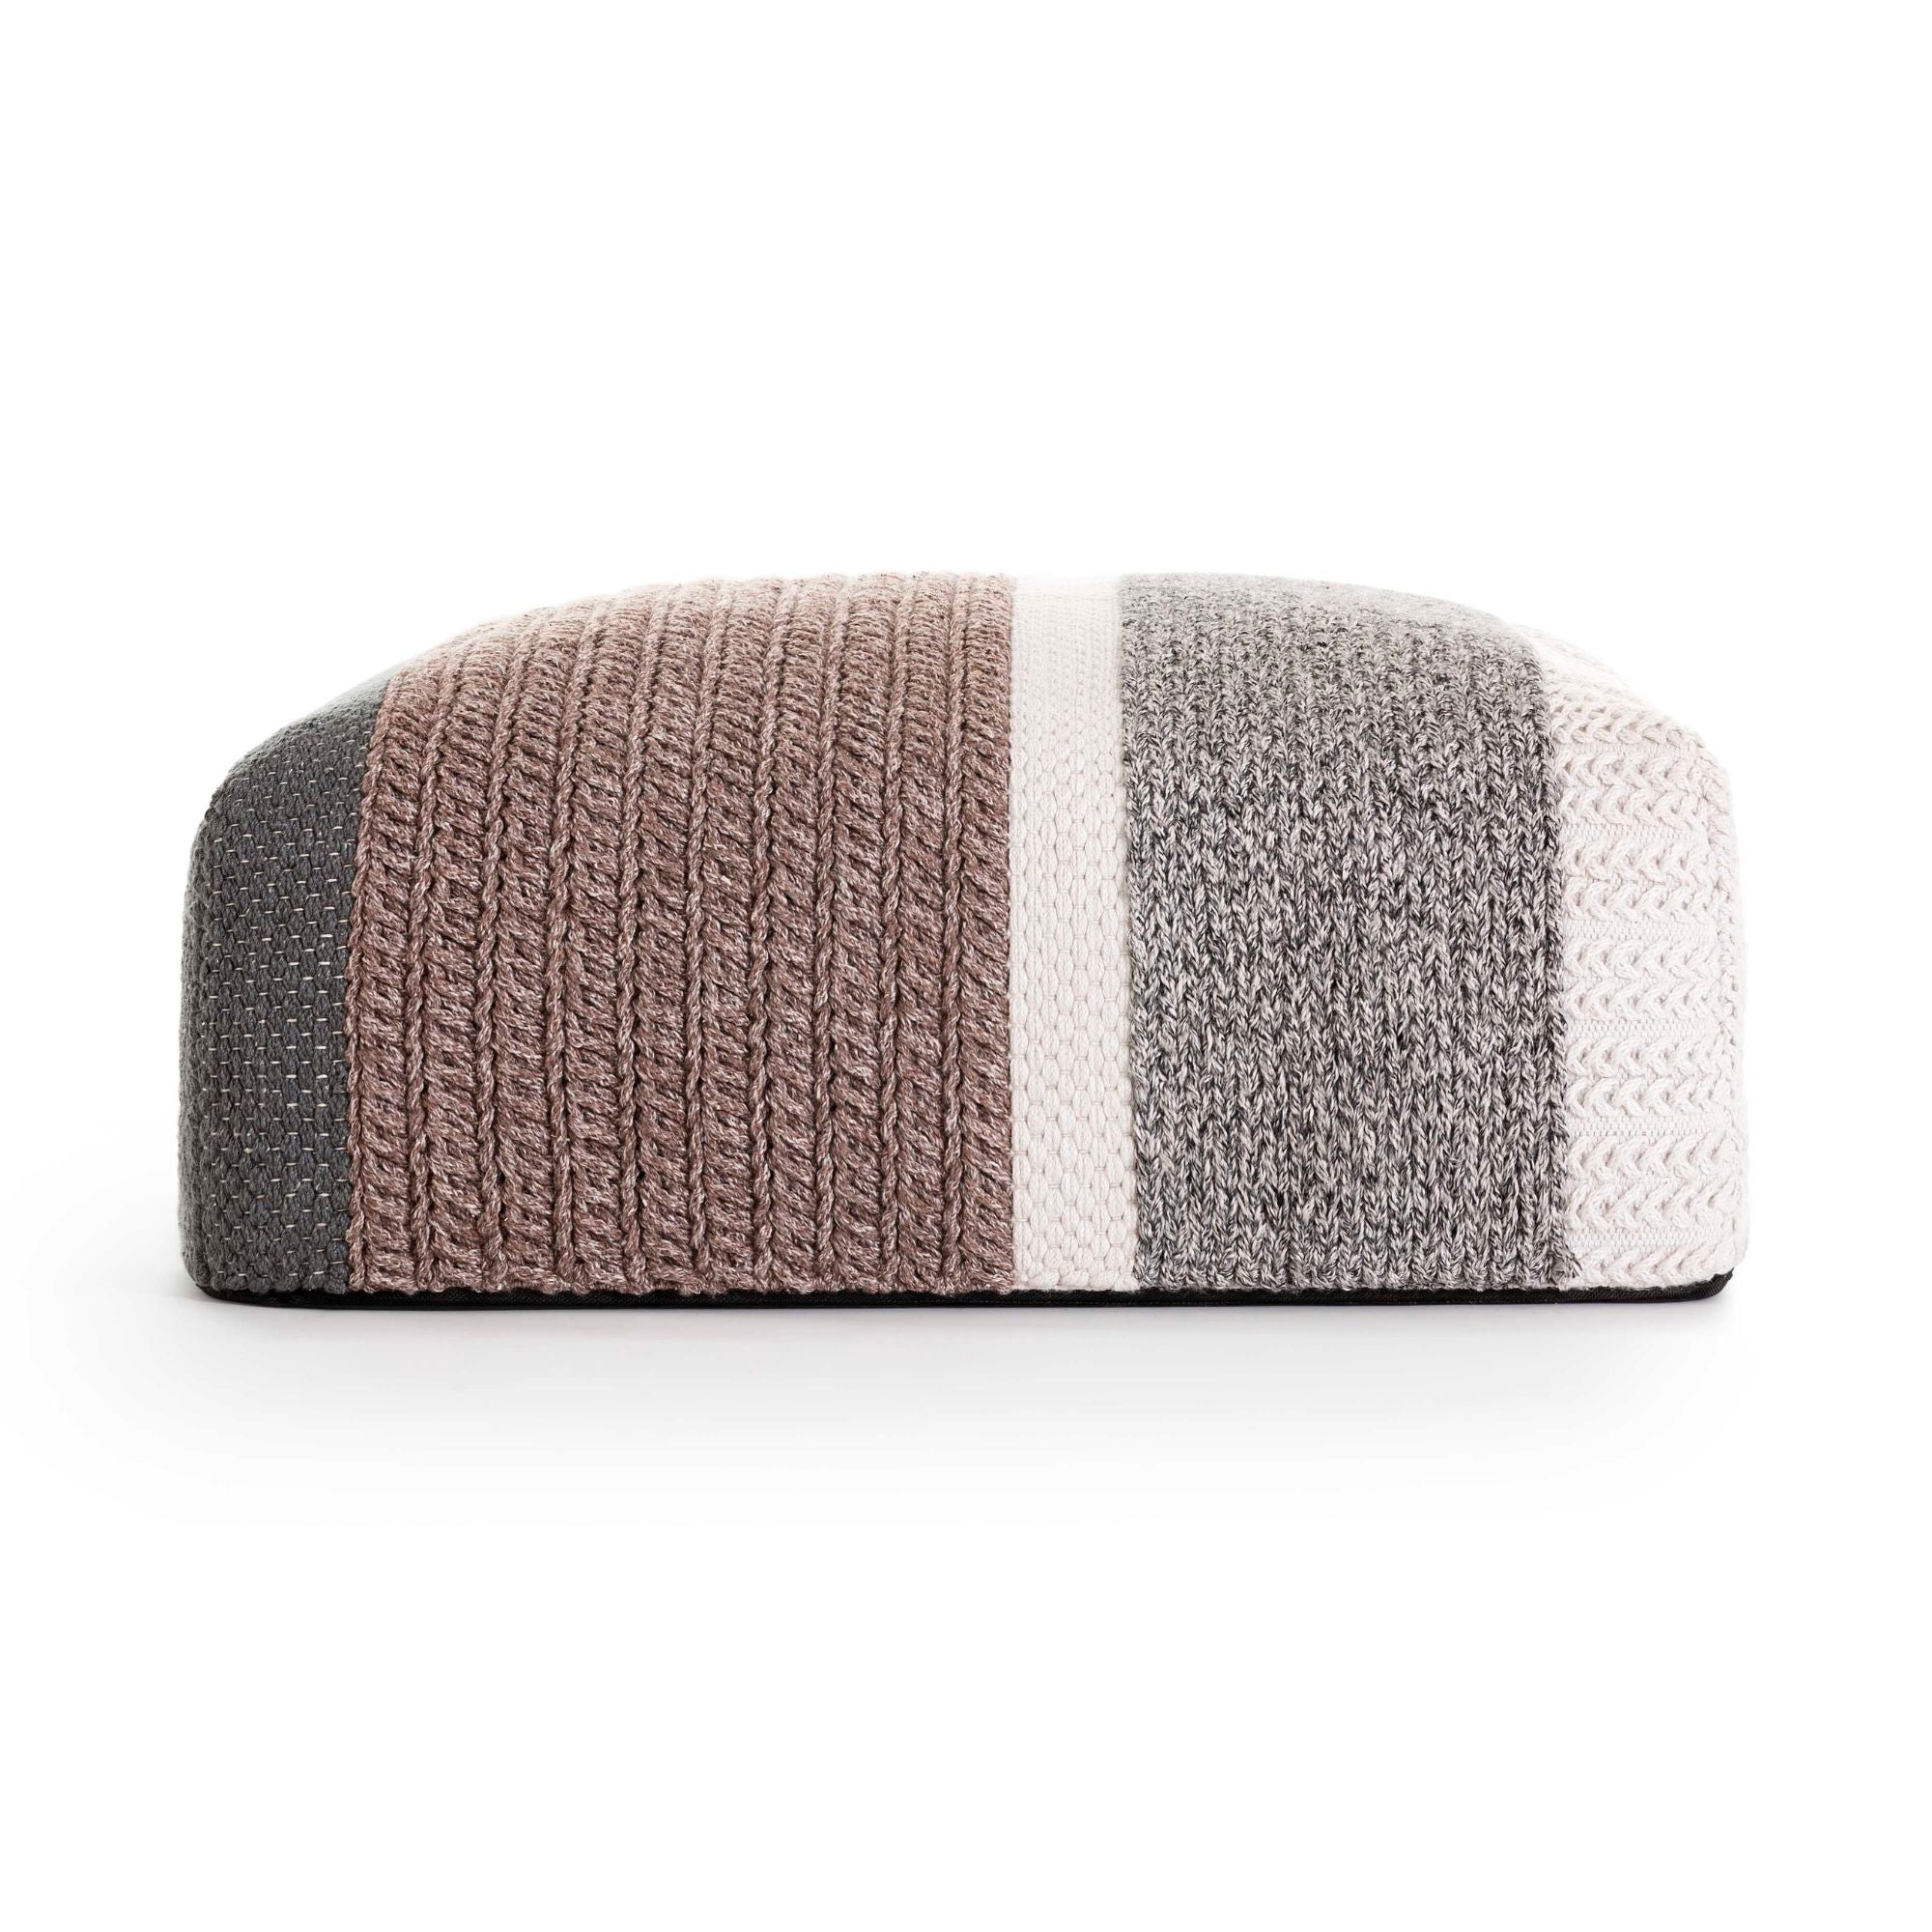 Mangas Outdoor Pouf - Multicolor - THAT COOL LIVING